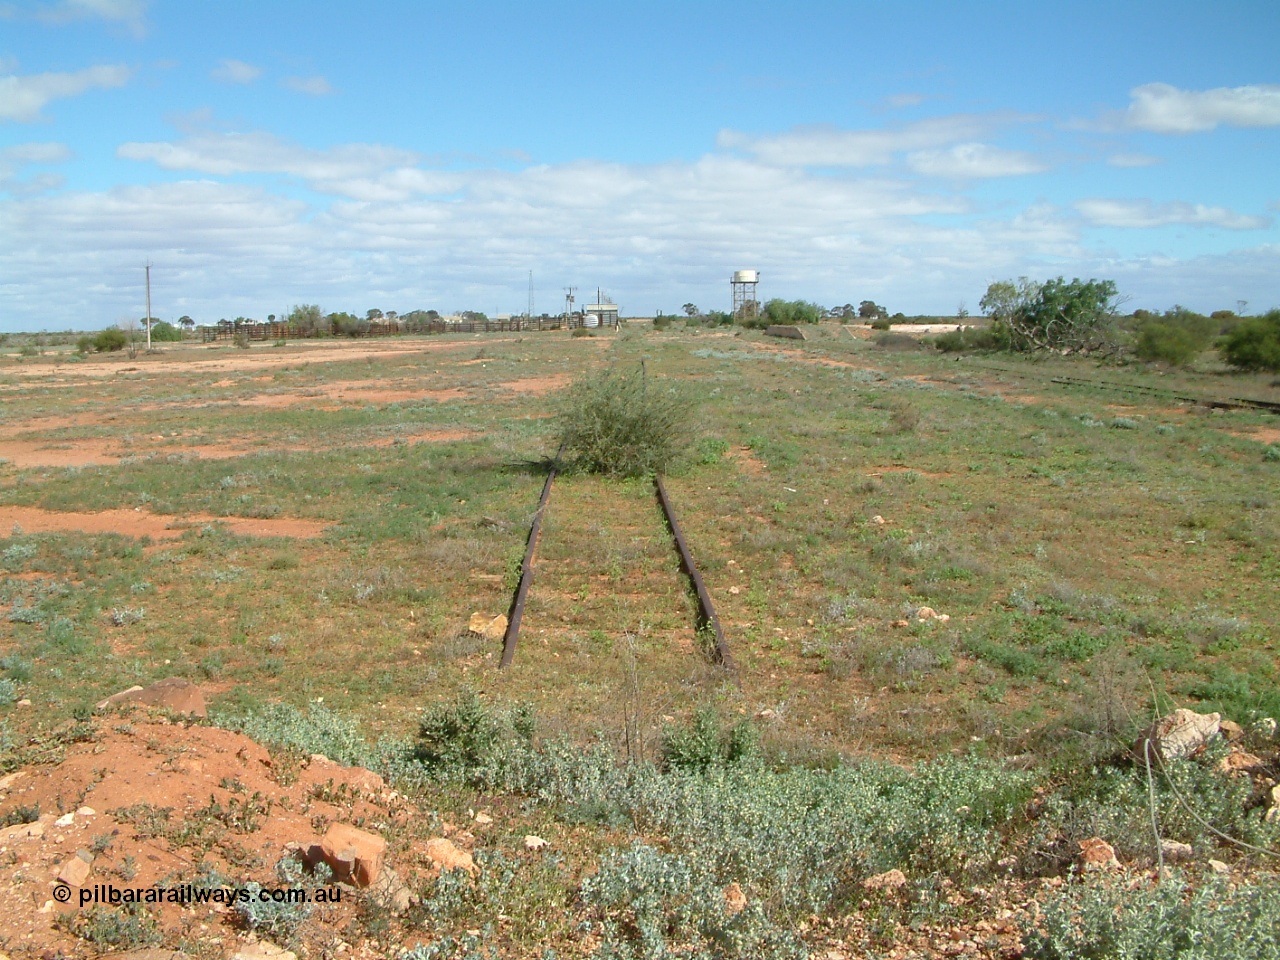 030415 141541
Kingoonya, located at the 426.5 km on the Trans Australian Railway, looking south with cattle yards and loading race, power station, standpipe and tanks stand all in the distance, loading ramp on the right. [url=https://goo.gl/maps/MeE2ay7UBV6jbHiR8]GeoData location[/url].
